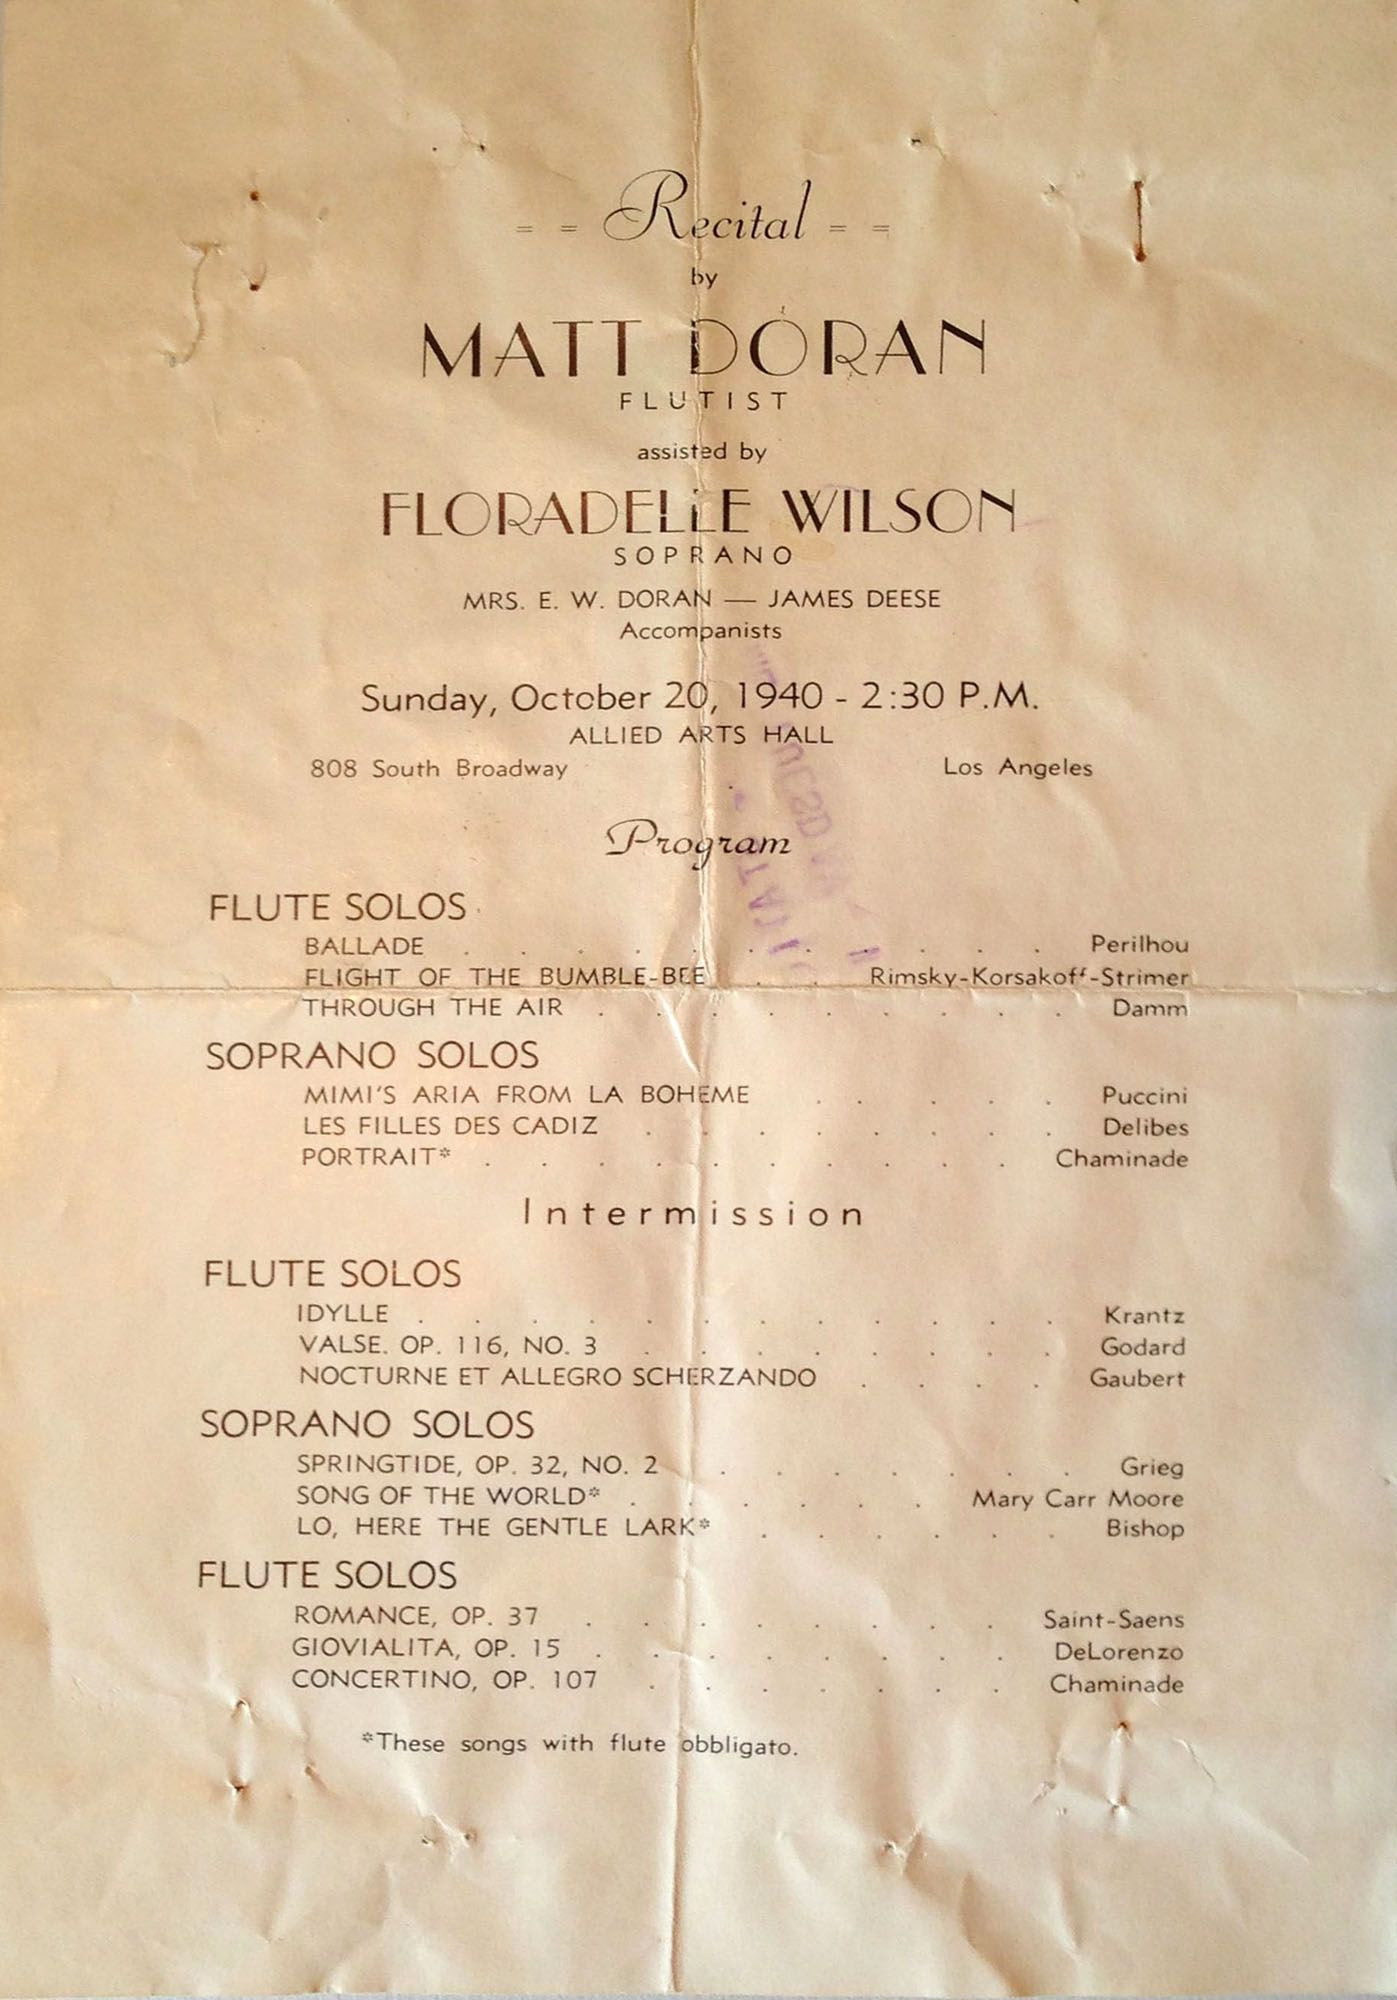 Hazel Dell: After The Columbian ran a story about local classical composer and musician Matt Doran, we were contacted by a historical researcher who's working for a singer Doran accompanied in concert 73 years ago. Here's the concert program -- dated Oct.